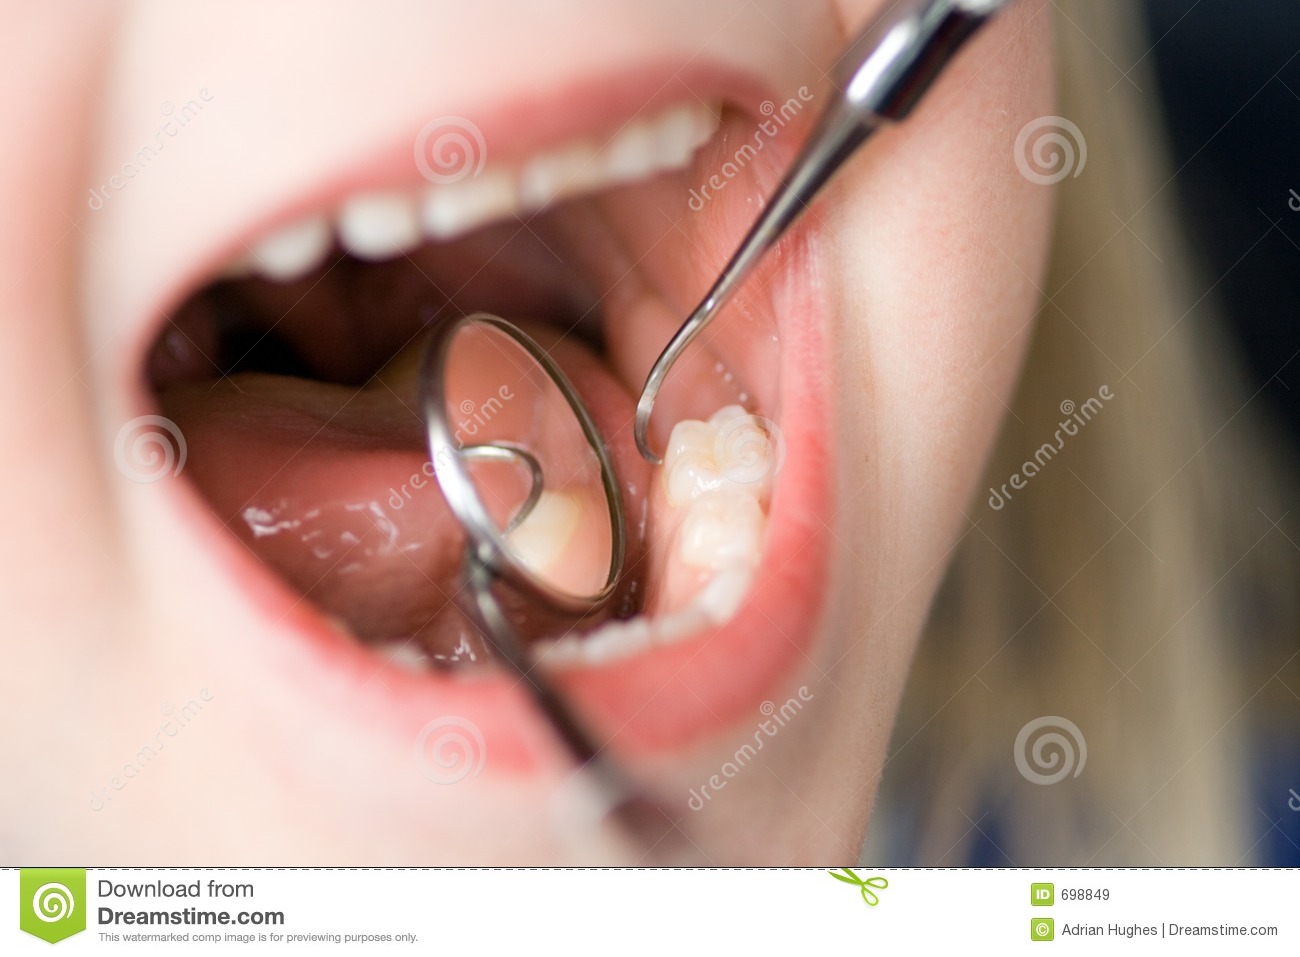 Child Dental Check Up Royalty Free Stock Images   Image  698849